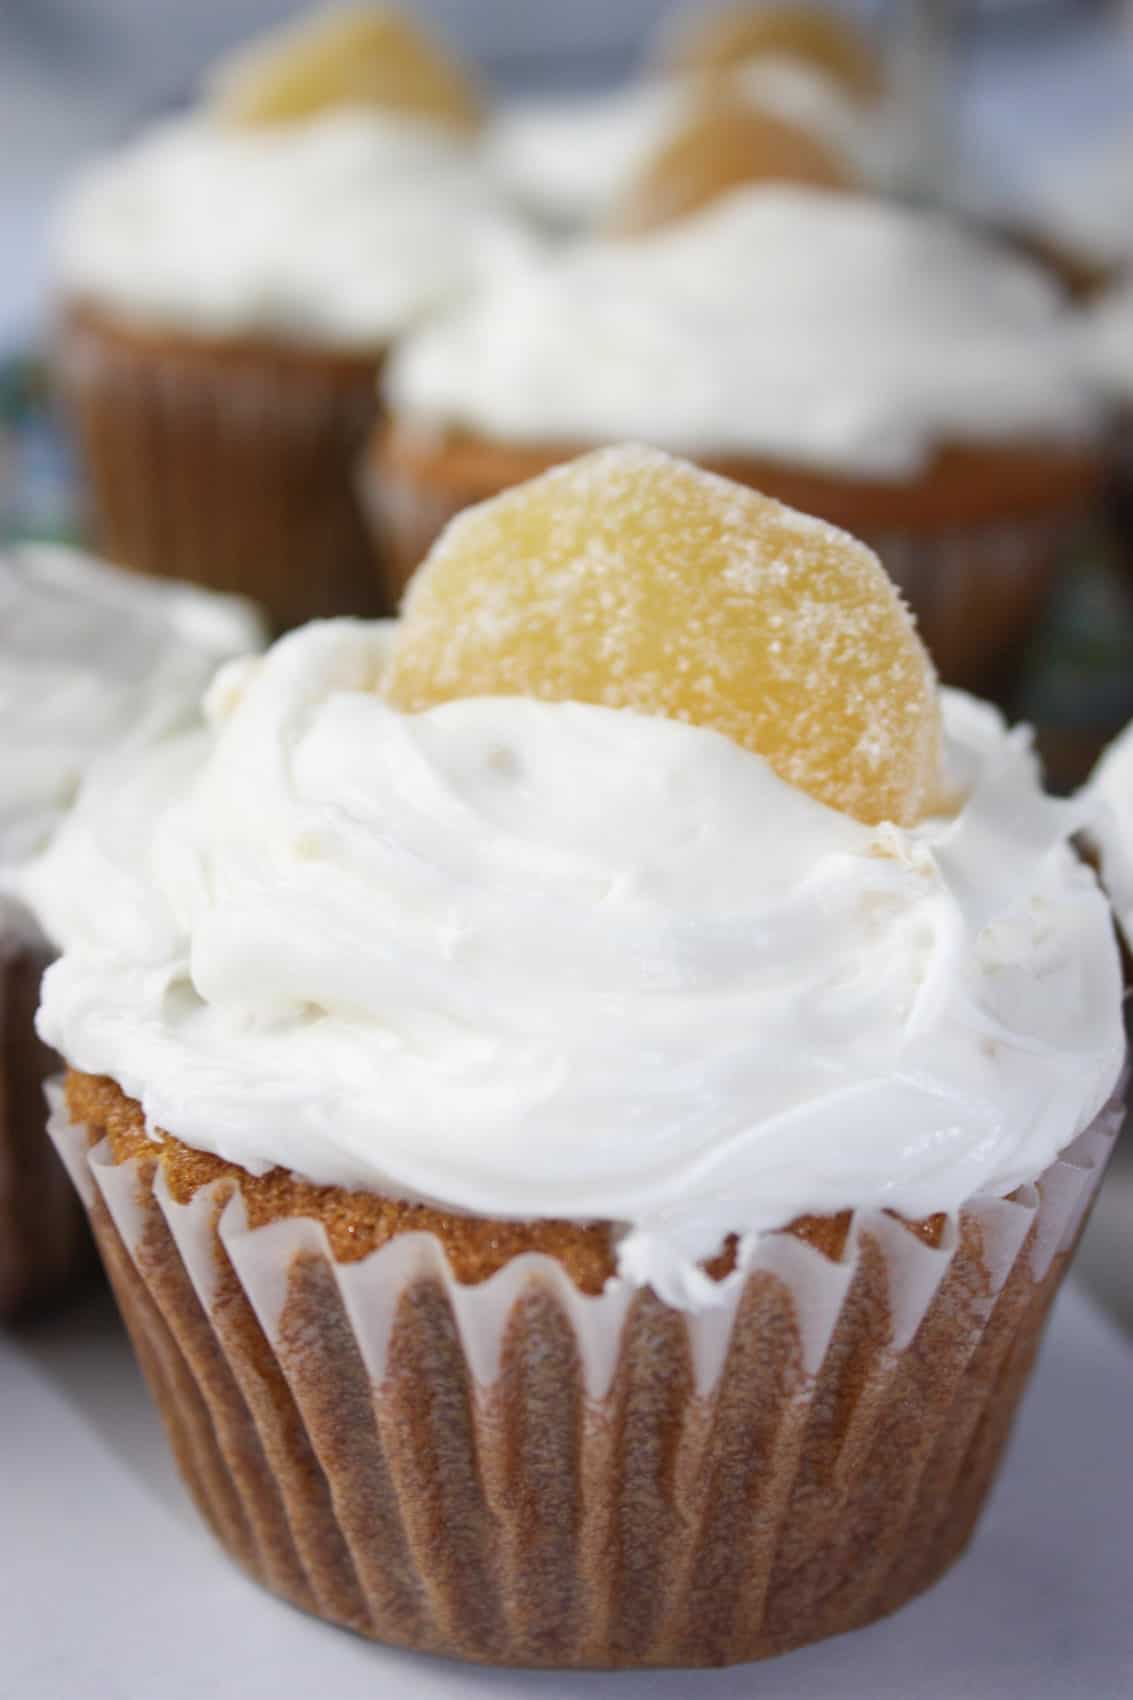 Now that Christmas Holidays are over Maple Ginger Cupcakes provide a delicious dessert option.  They are moist cupcakes loaded with maple syrup and a hint of ginger.  